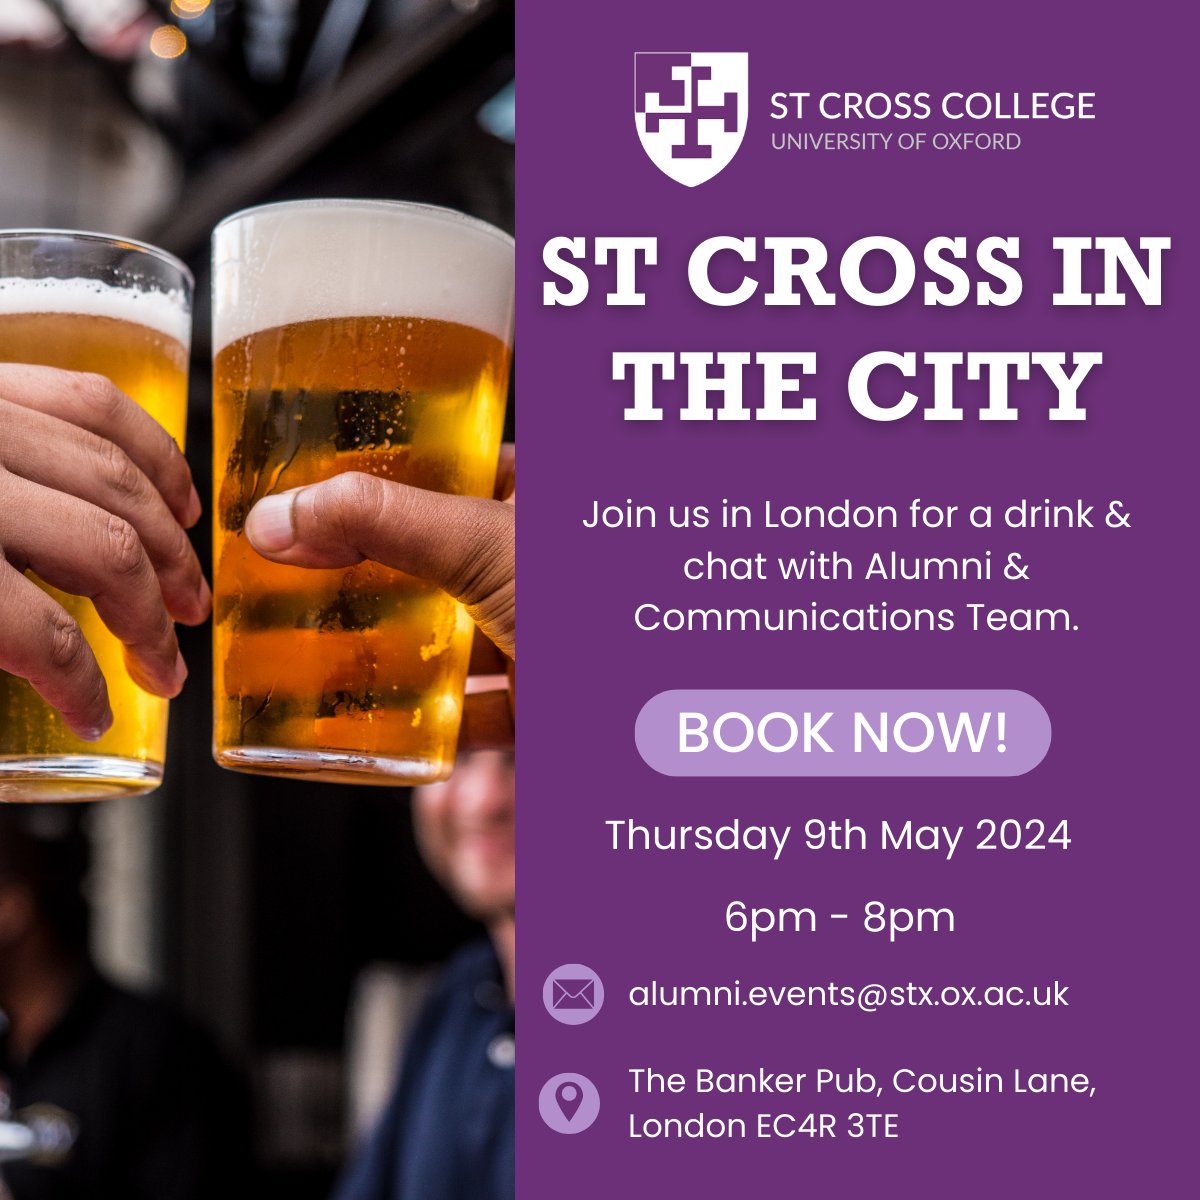 We welcome Alumni and a guest to join us in London for a drink or two! Pop in and say hi to our Alumni and Communications team. Date: Thursday 9th May 2024 Time: 6pm - 8pm Please book via alumni.events@stx.ox.ac.uk. ow.ly/E6qM50RjOjo We look forward to seeing you!